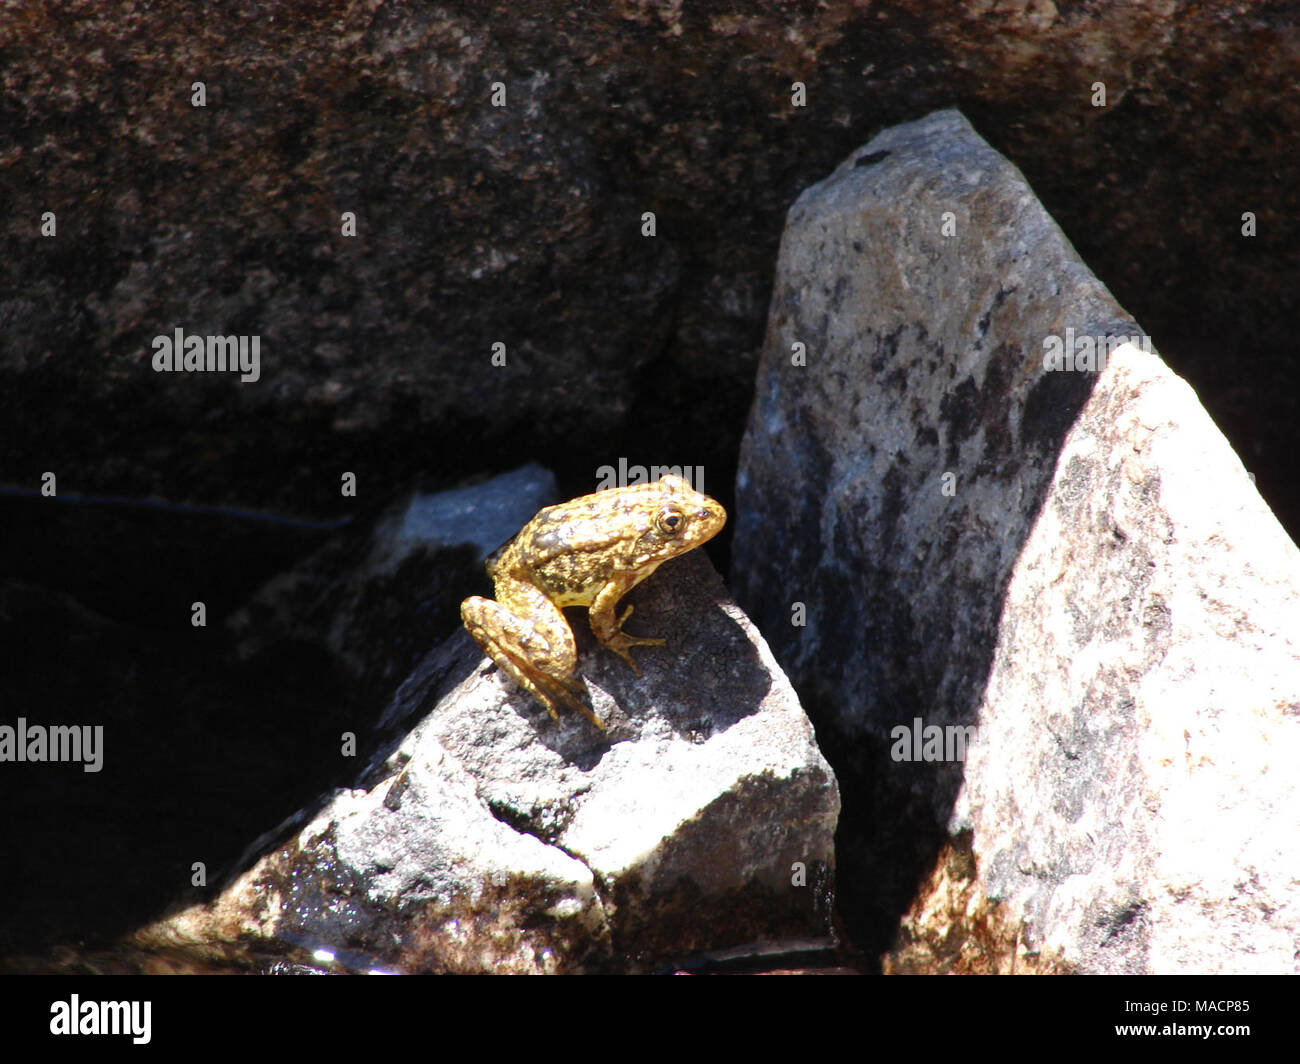 Yellow legged frog on a rock. The FWS is currently monitoring the following two populations of the Mountain Yellow-Legged frog   - Southern California population, endangered. Found in California and Nevada .  - all mountain yellow-legged frogs that occur north of the Tehachapi Mountains in the Sierra Nevada. This is a candidate for listing on the endangeres species act. Occurs in California and Nevada . /Rick Kuyper Stock Photo